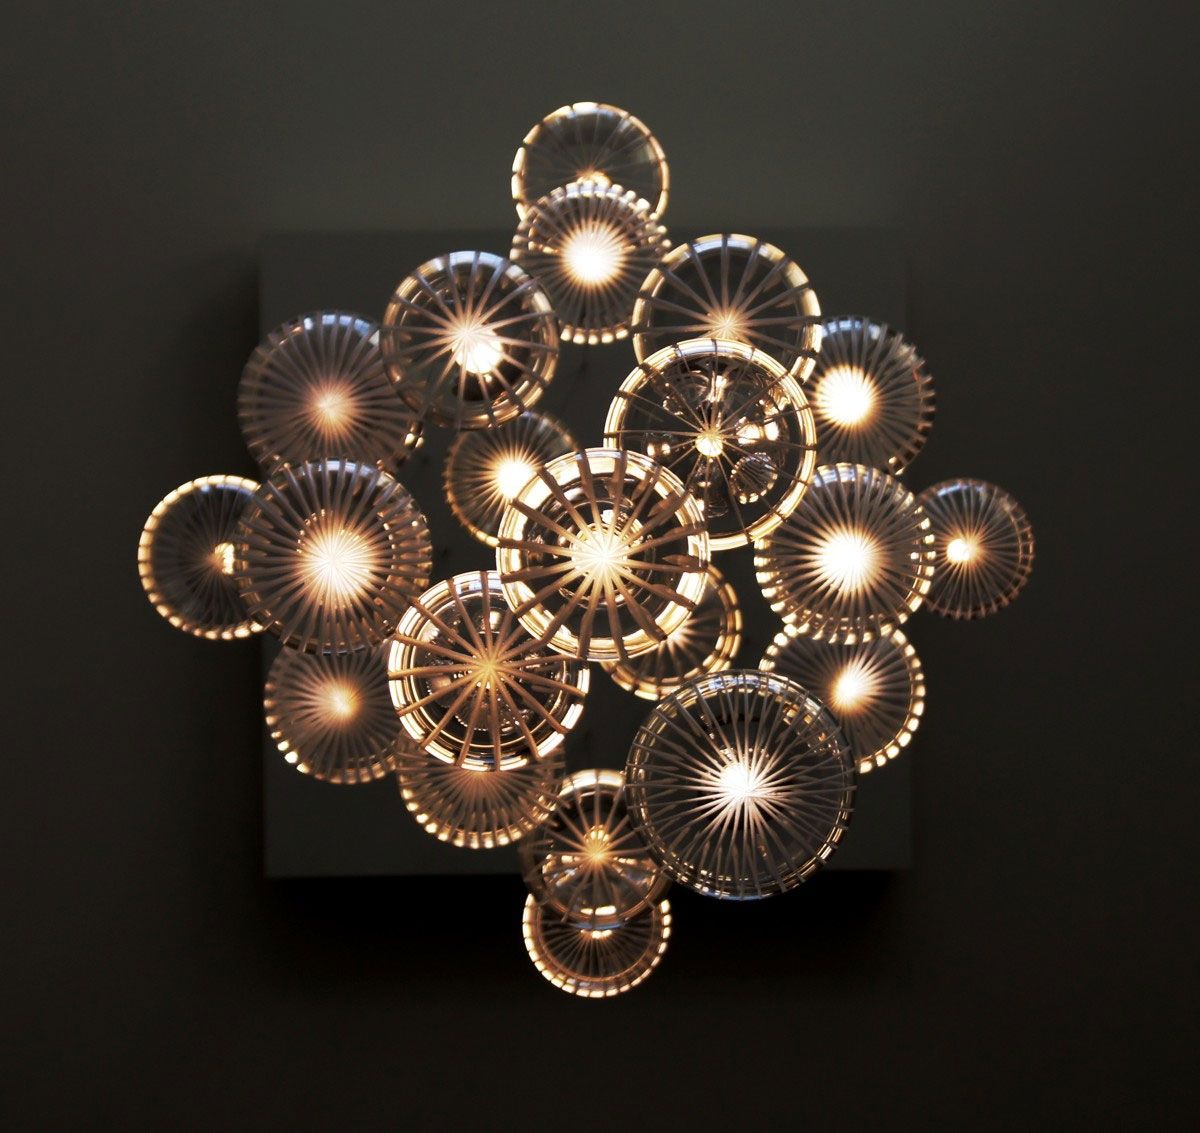 Chandelier Inspiring Chandelier Contemporary Modern Chandeliers Intended For Contemporary Chandeliers (View 4 of 12)